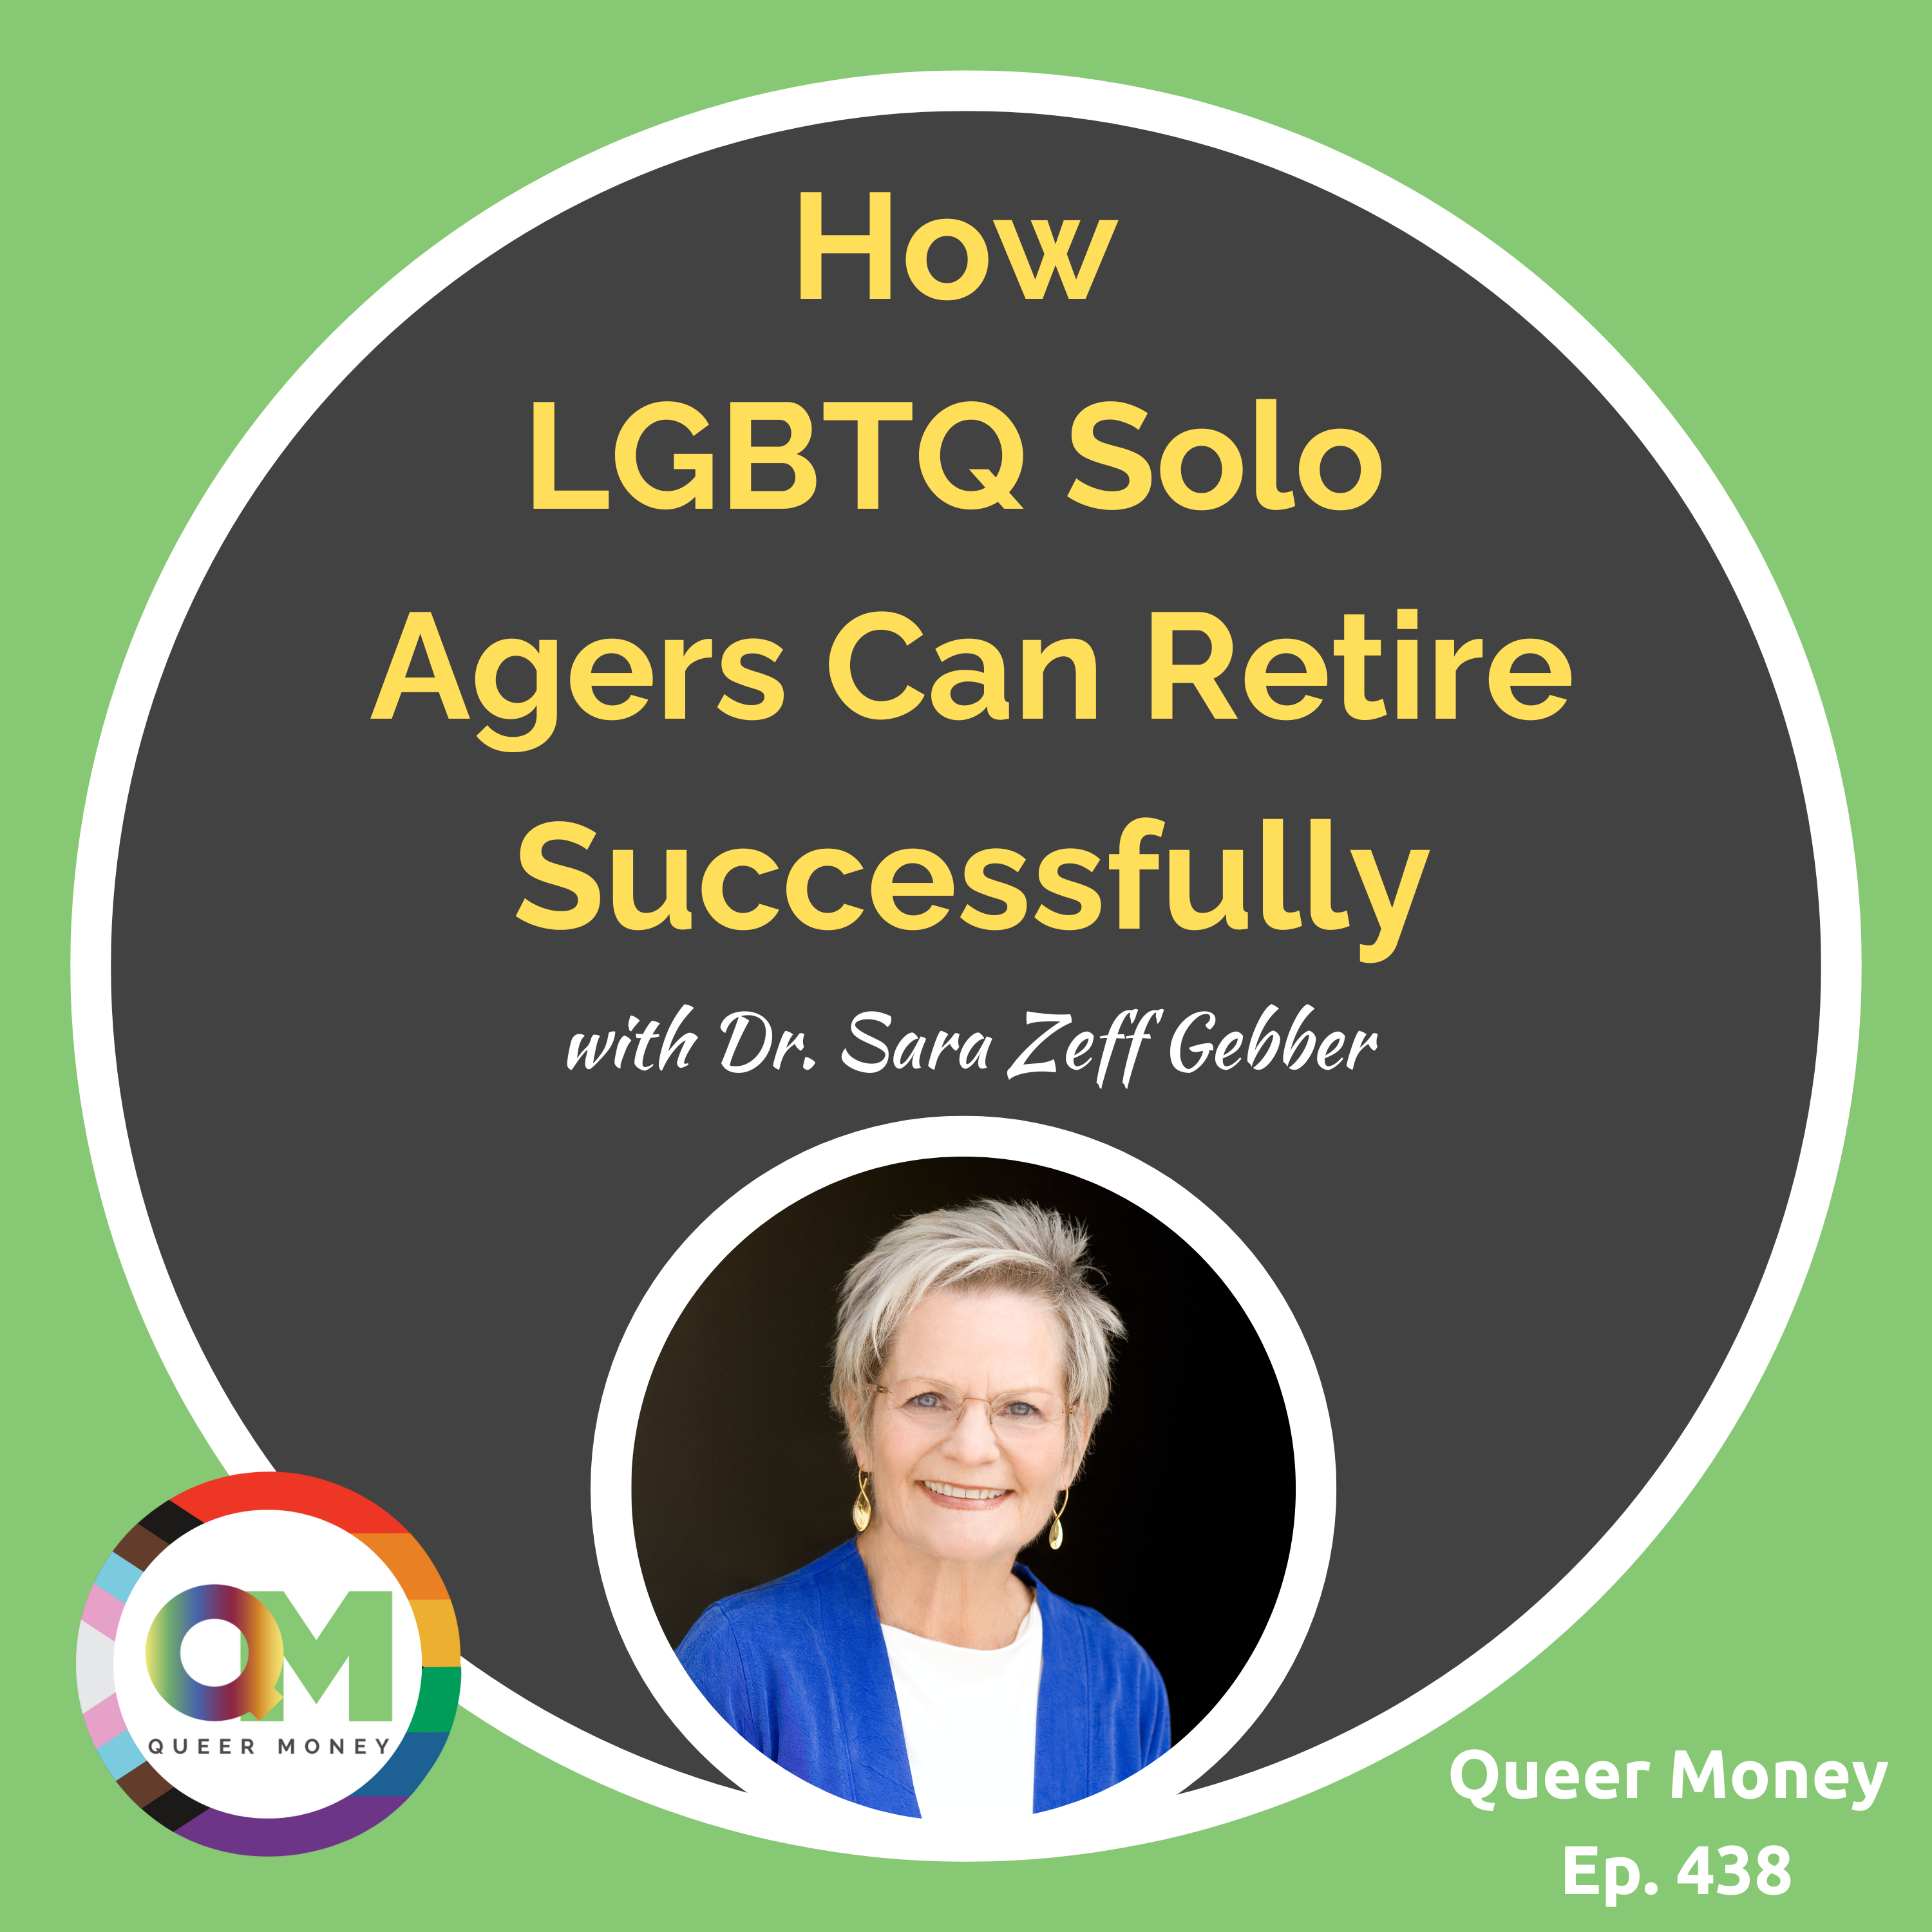 How LGBTQ Solo Agers Can Retire Successfully | Queer Money Ep. 438